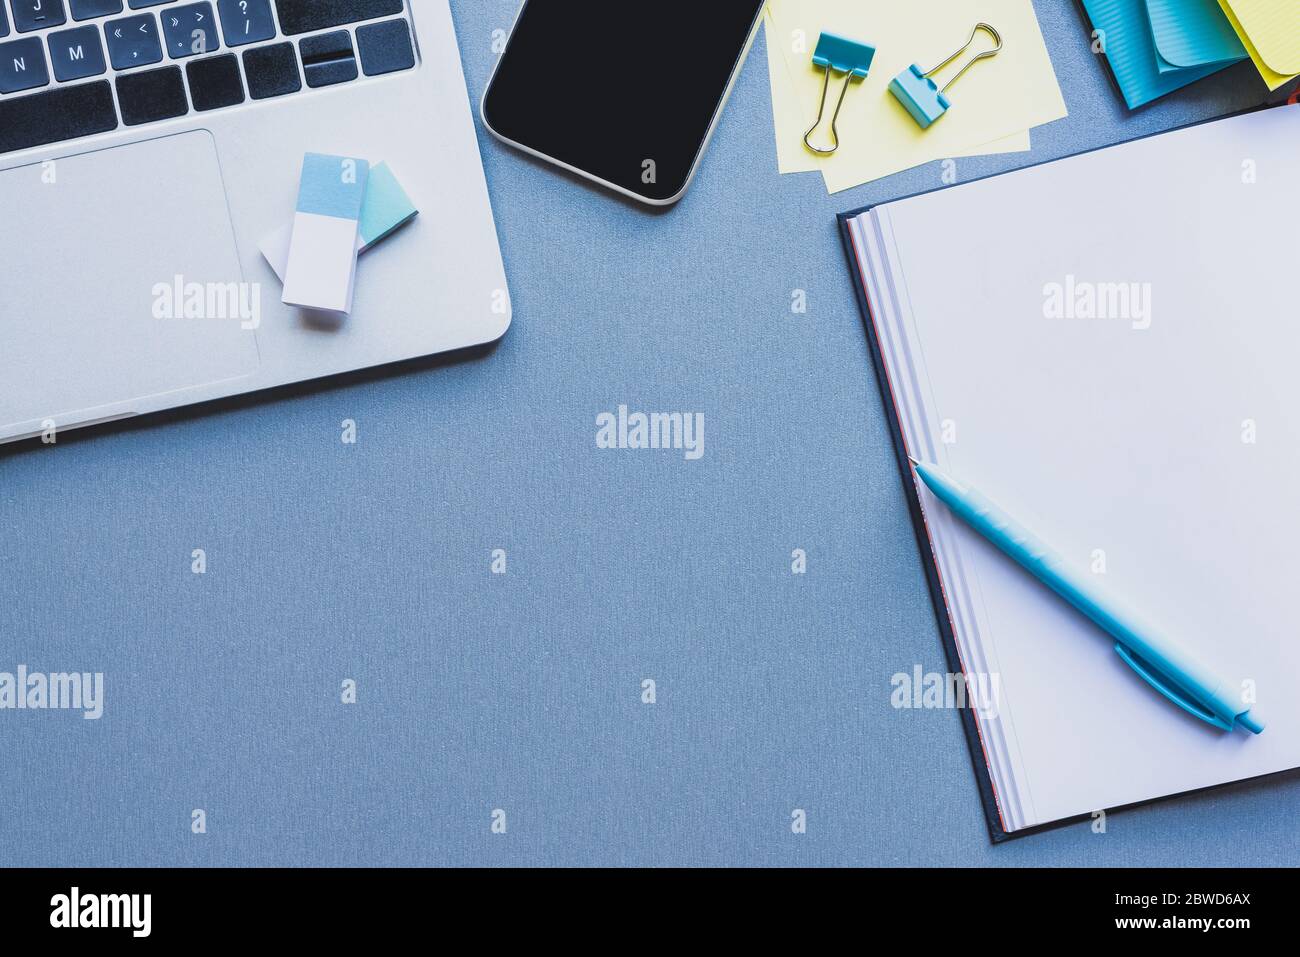 Top view of digital devices, stationery and open notebook on blue surface Stock Photo